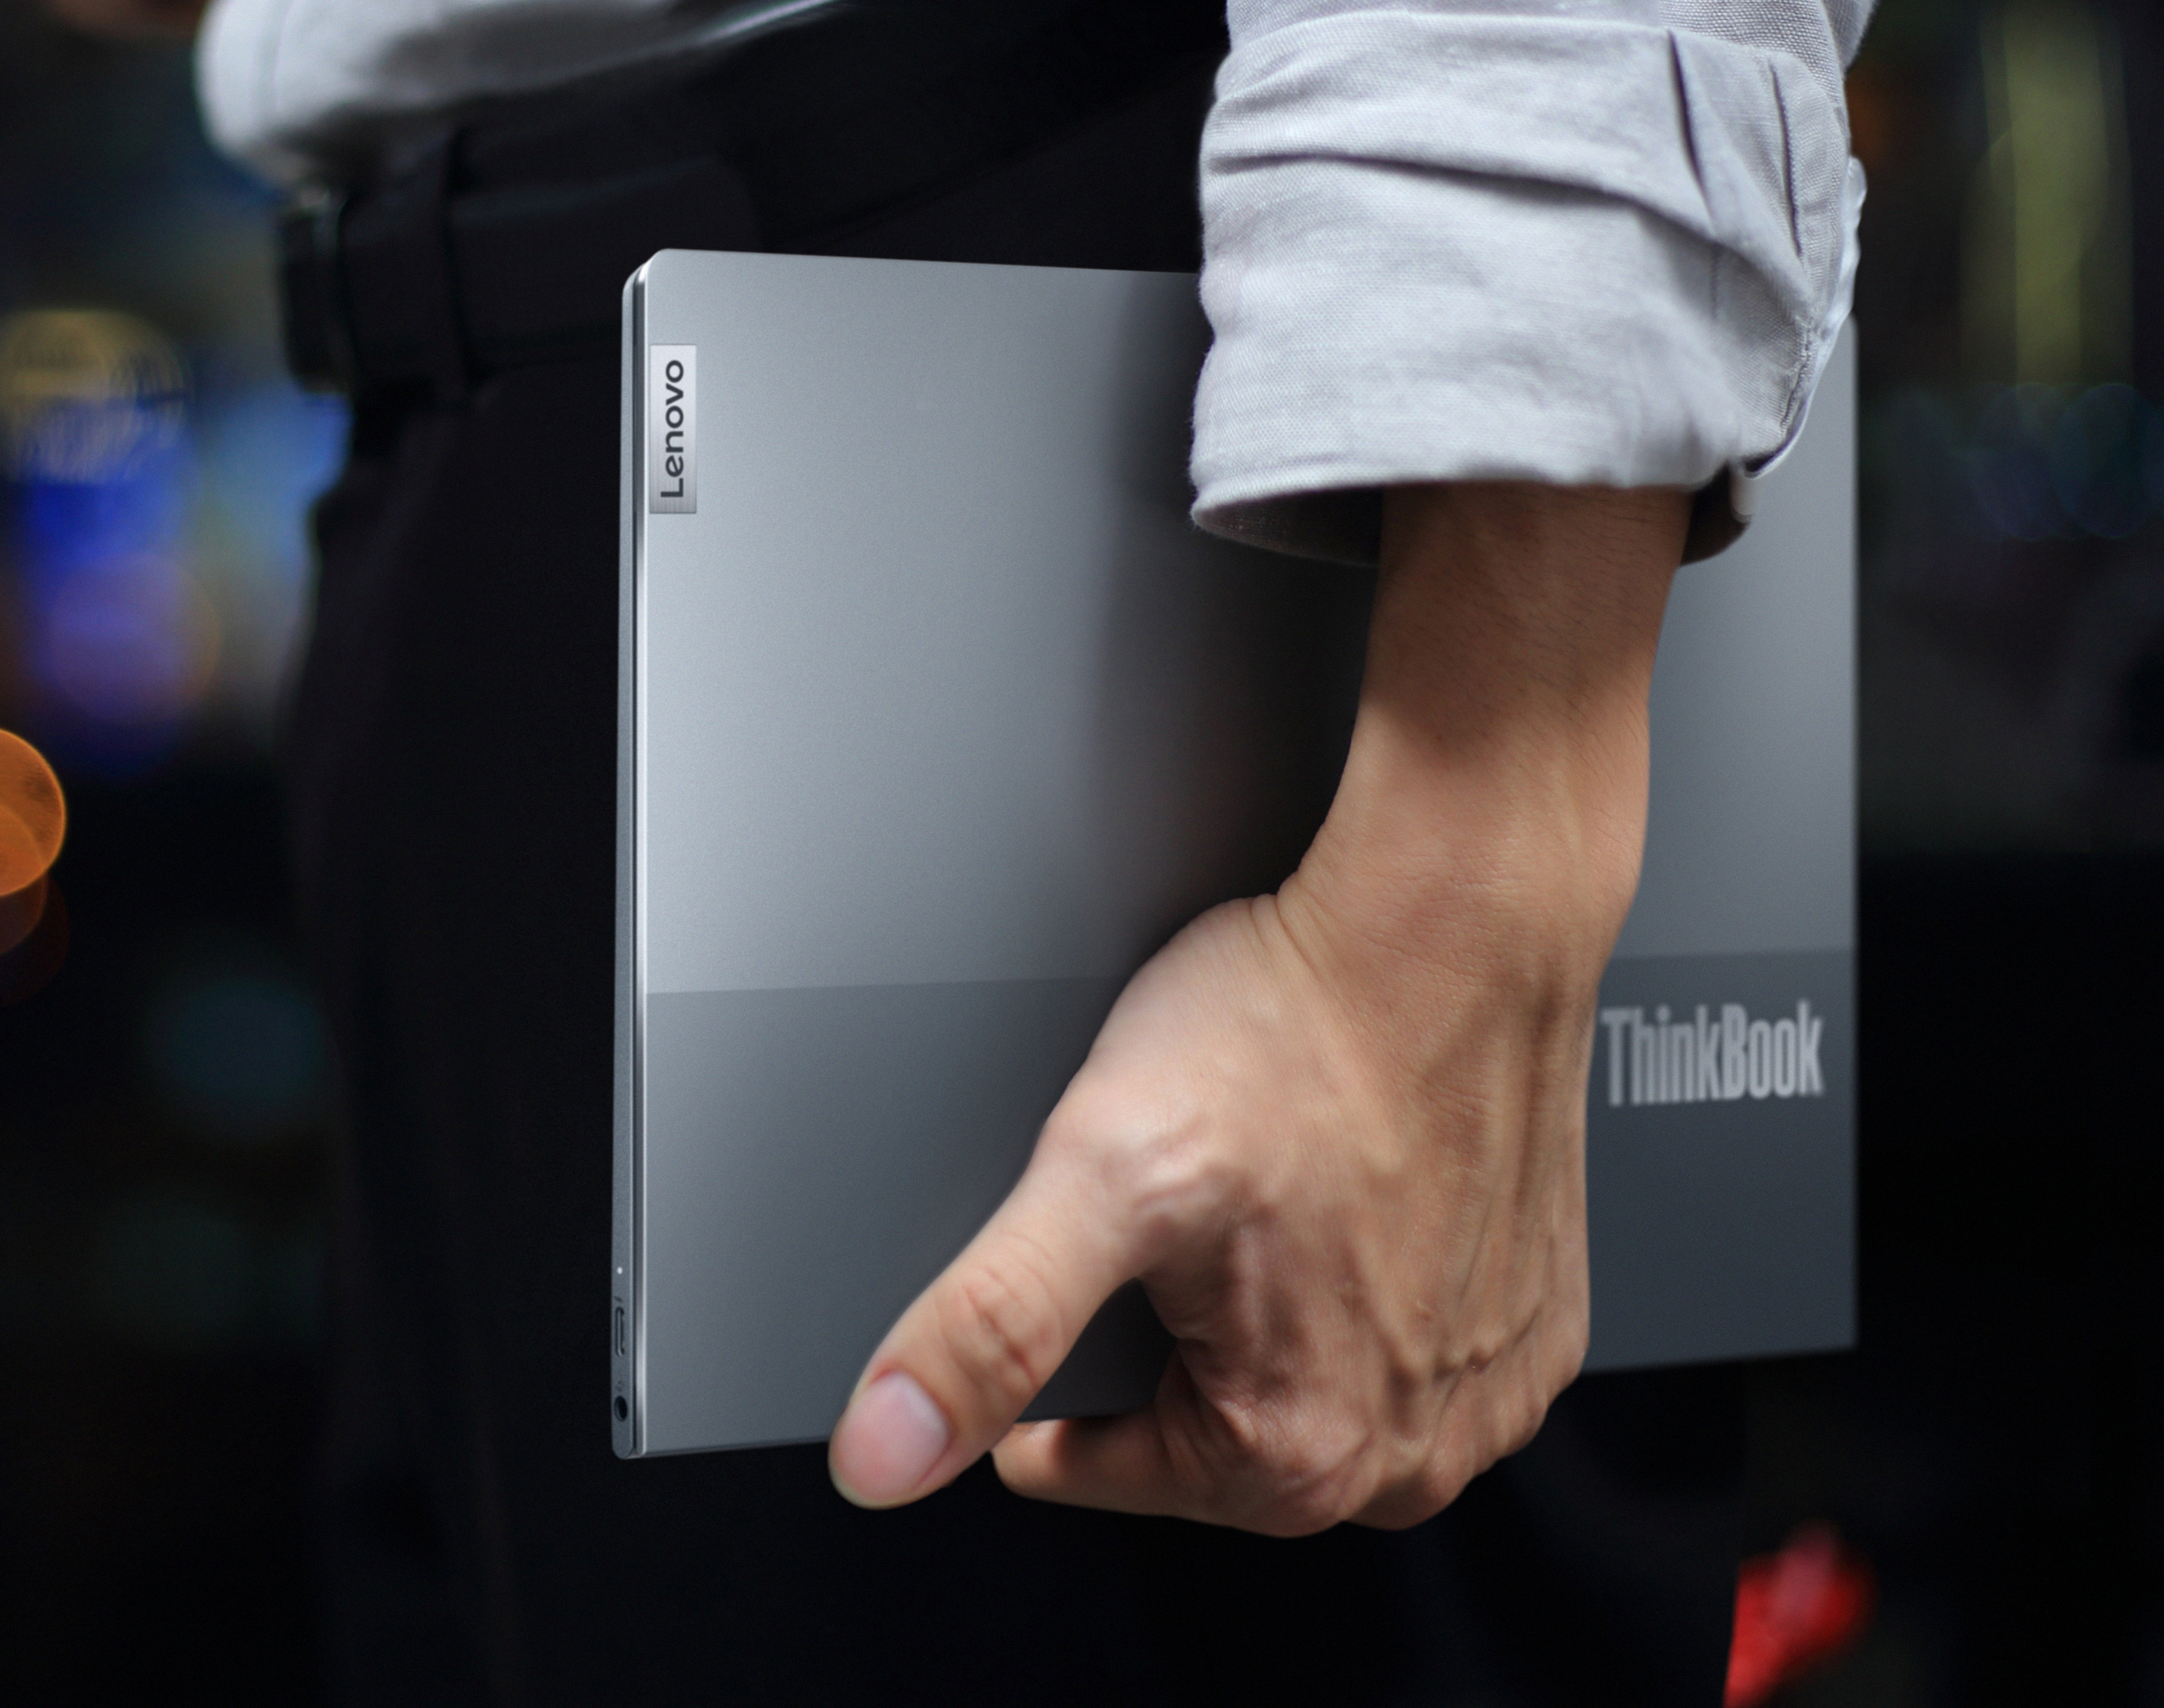 Lenovo announces ThinkBook 13x Gen 2 i business ultrabook with Intel Alder Lake processors and AI-powered meeting software suite - Notebookcheck.net